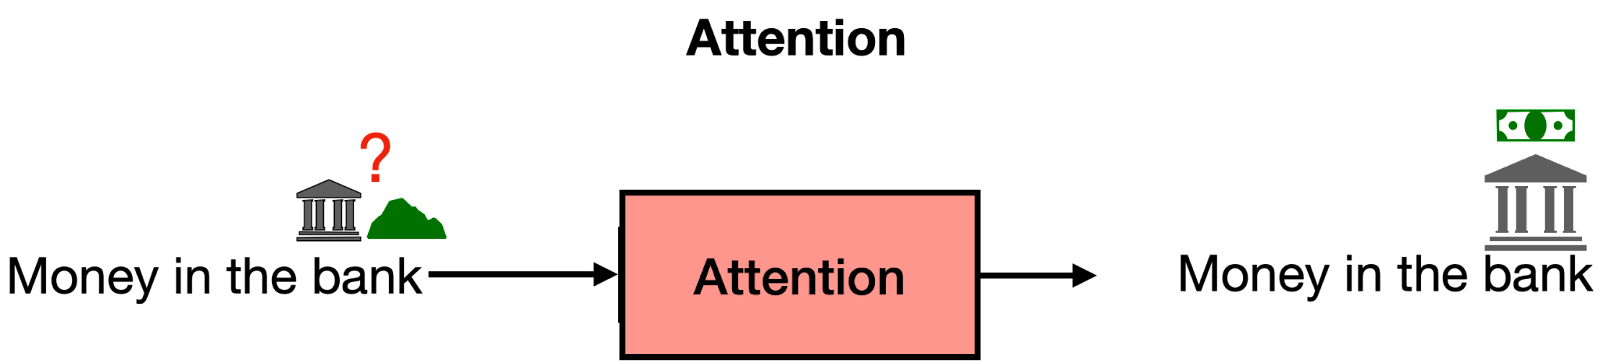 Attention helps give context to each word, based on the other words in the sentece (or text)